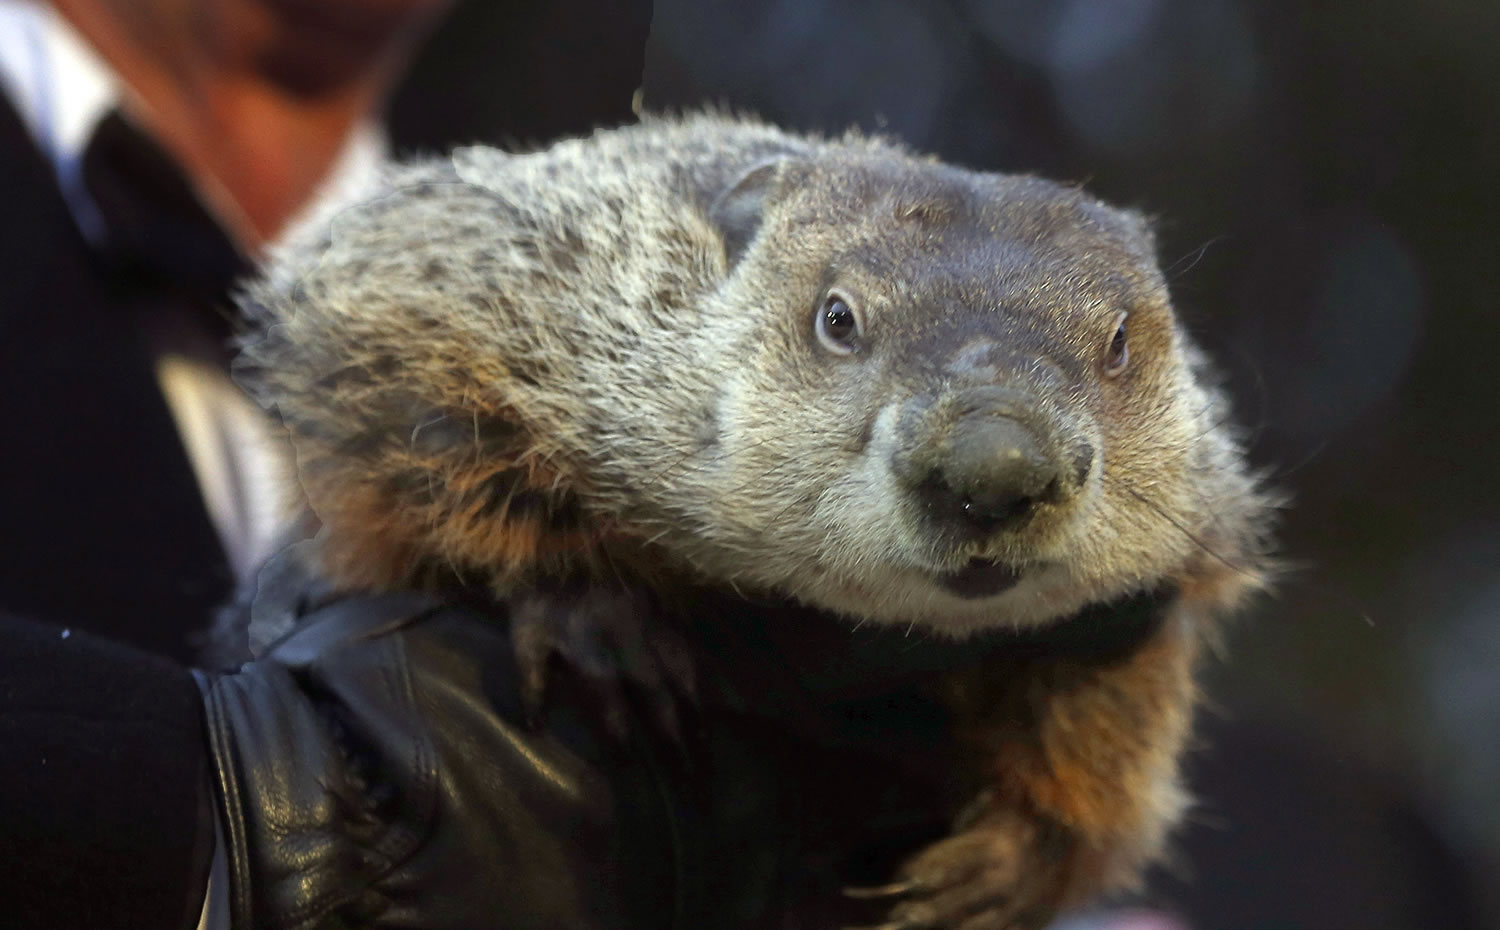 An Ohio county still gripped by winter weather has &quot;indicted&quot; groundhog Punxsutawney Phil for his forecast of an early spring.